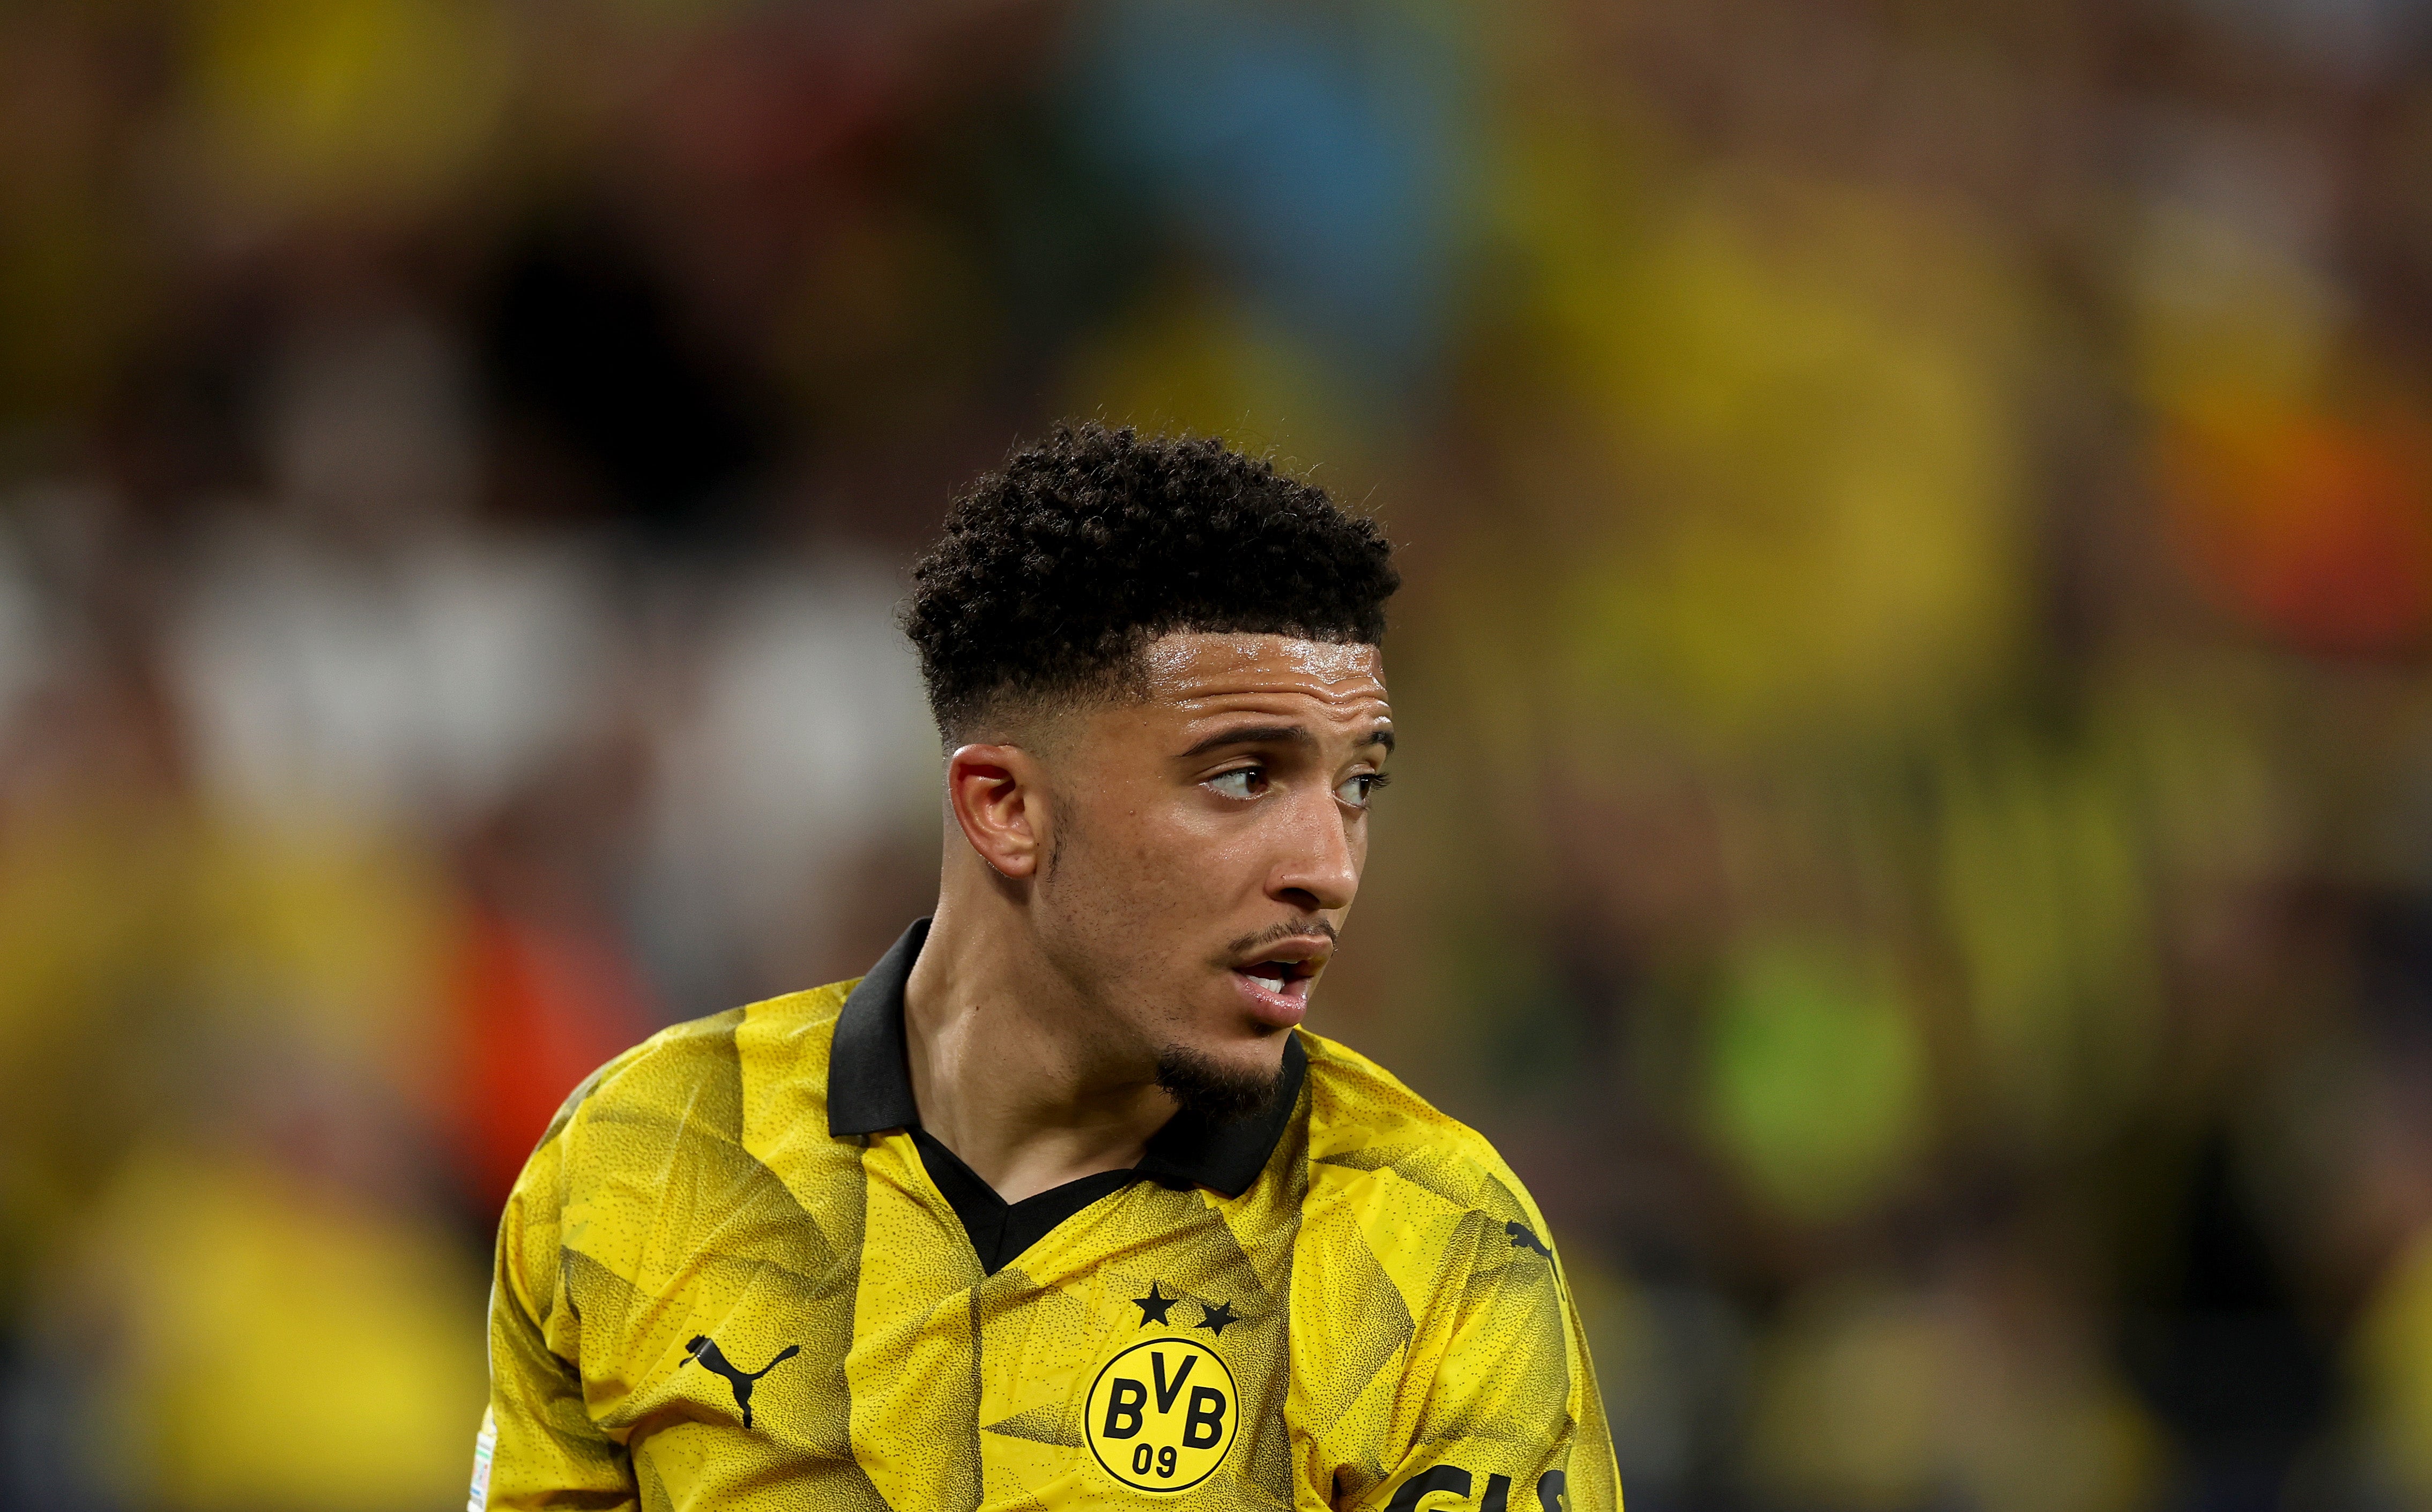 Jadon Sancho delivered one of the best performances of the Champions League knockout stages